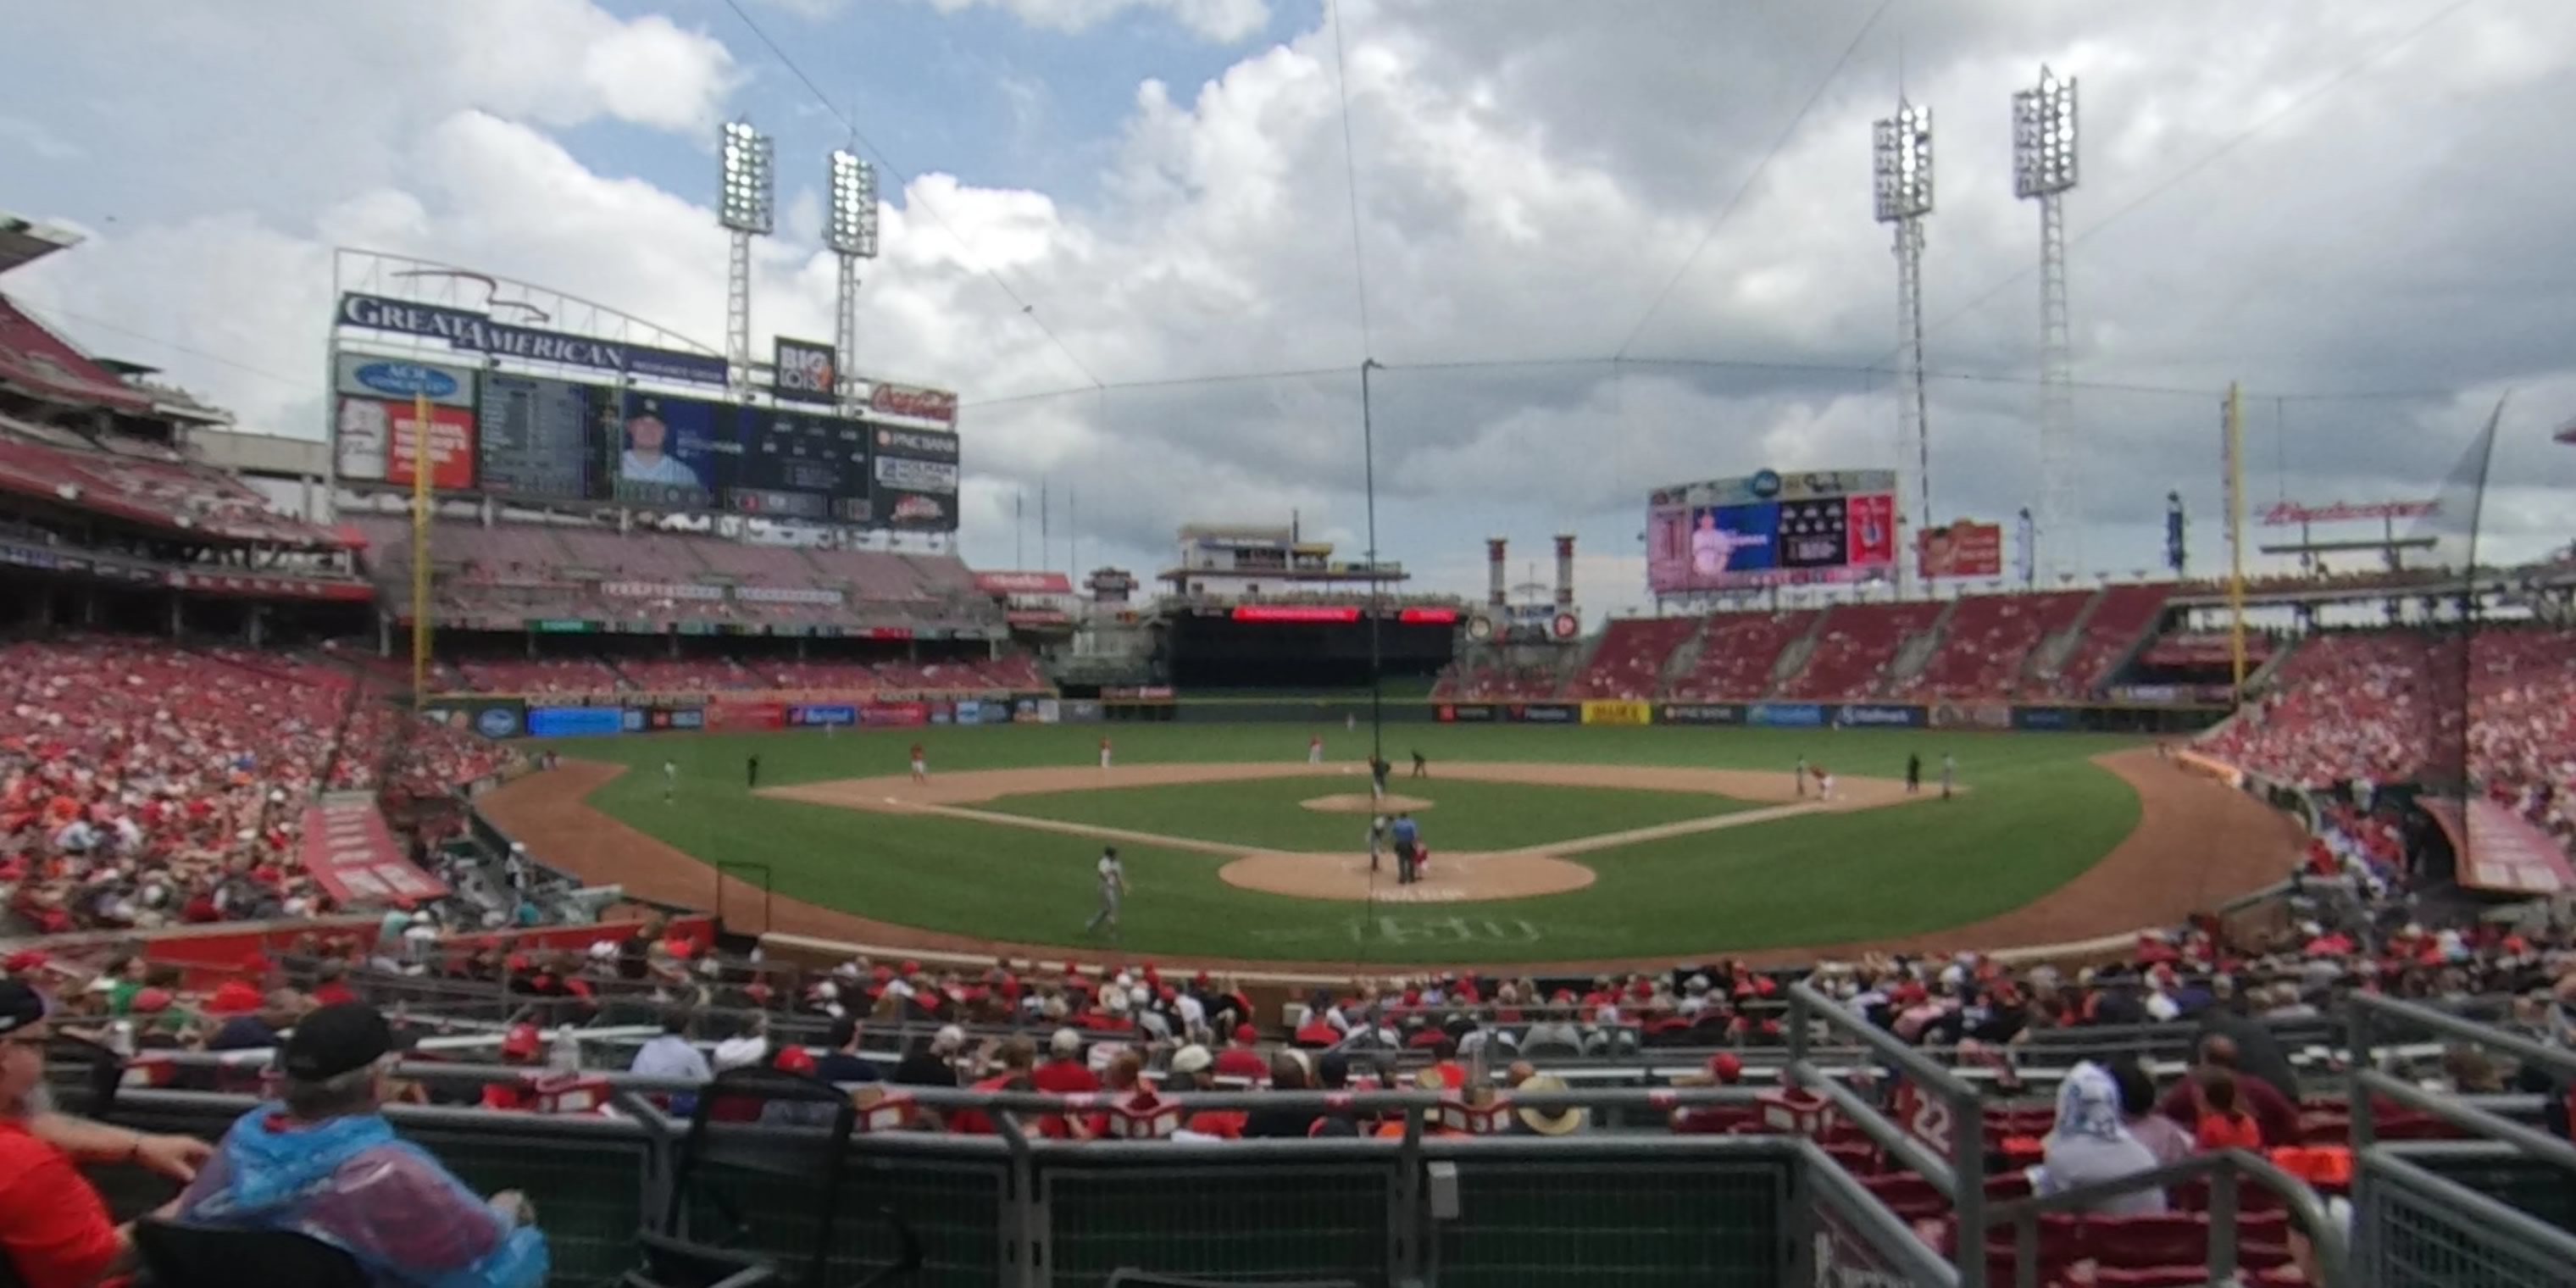 Great American Ball Park: Reds stadium guide 2023